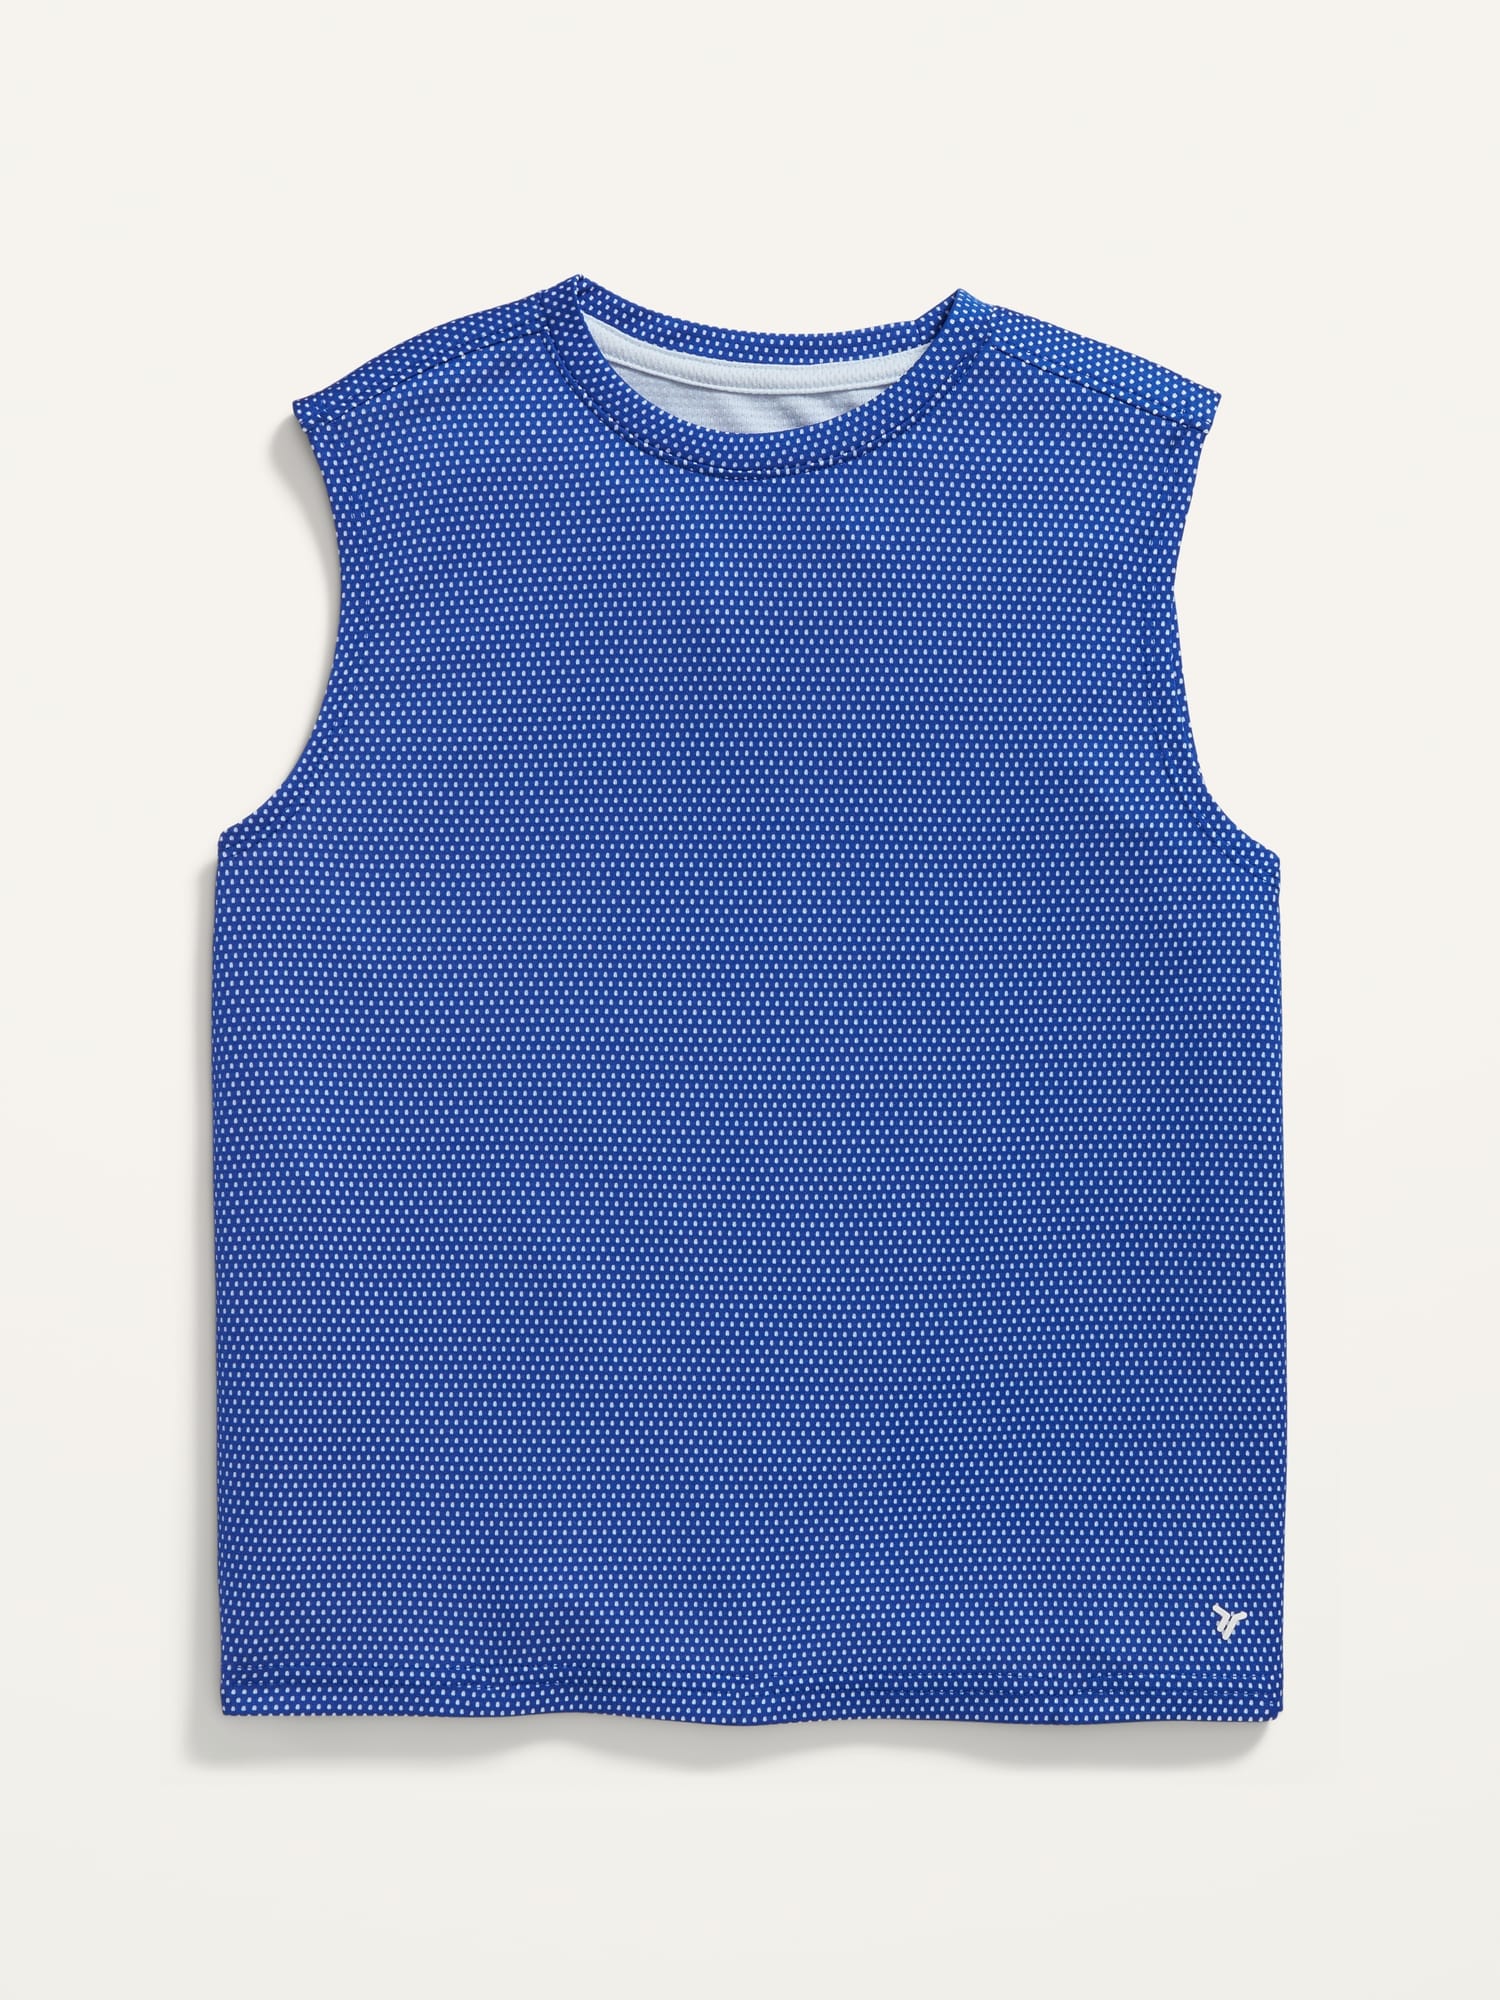 Old Navy Go-Dry Cool Two-Tone Textured-Knit Performance Tank Top for Boys blue. 1